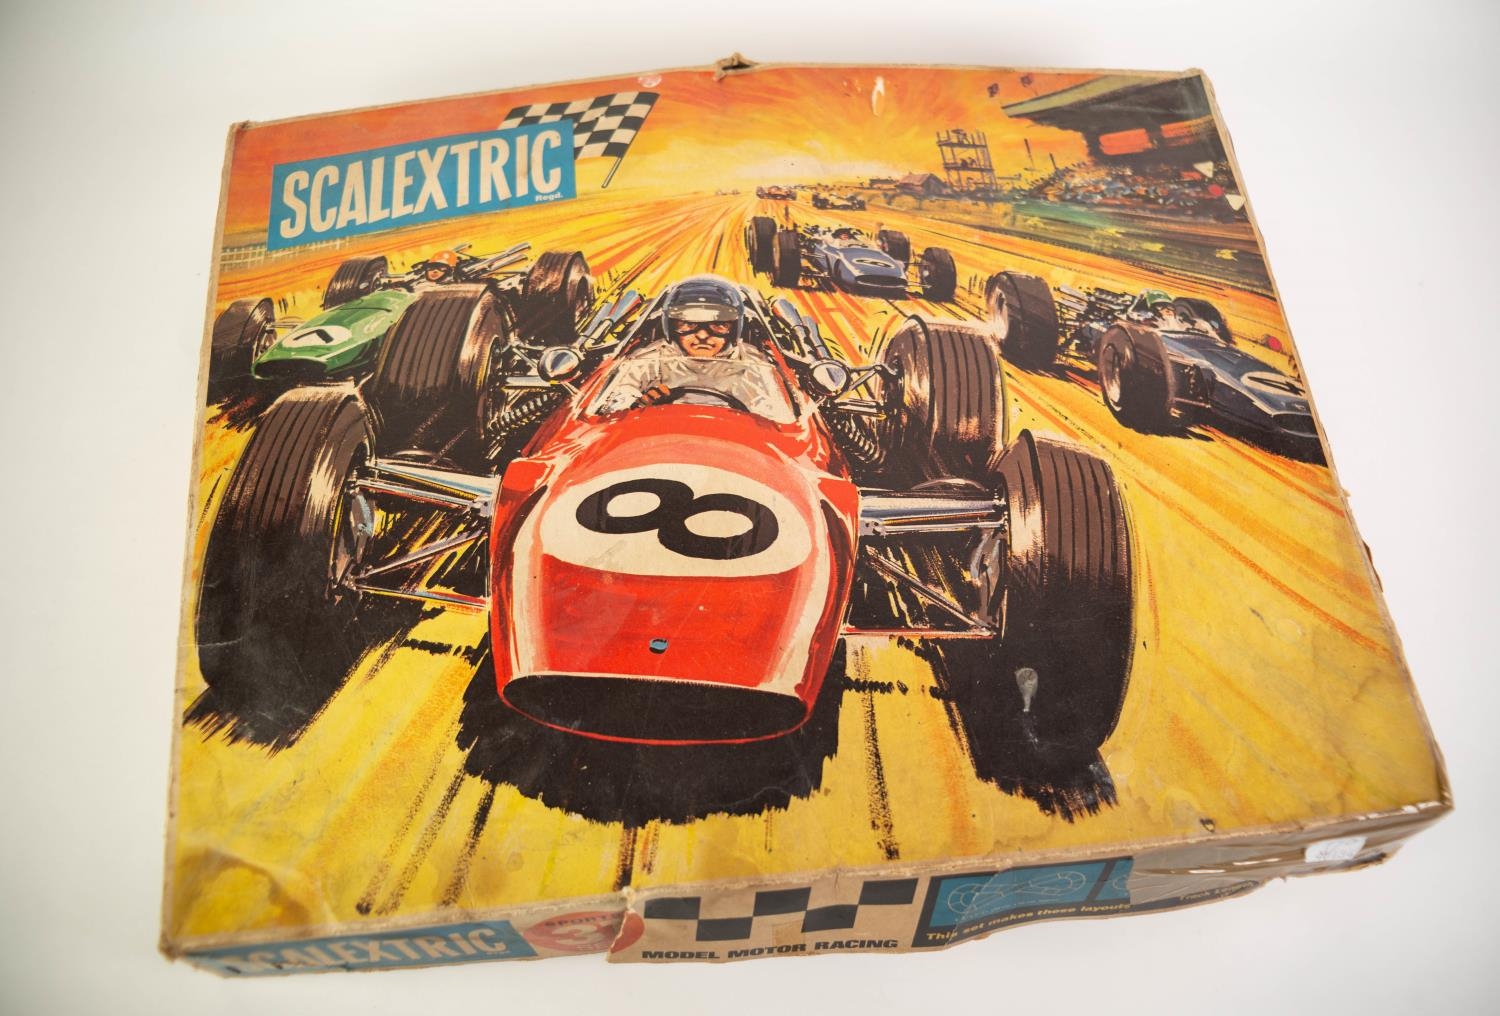 BOXED SCALEXTRIC SPORTS 31 SET, with Renault Alpine and Jaguar 'E' Type cars, Rally - Mini Cooper C7